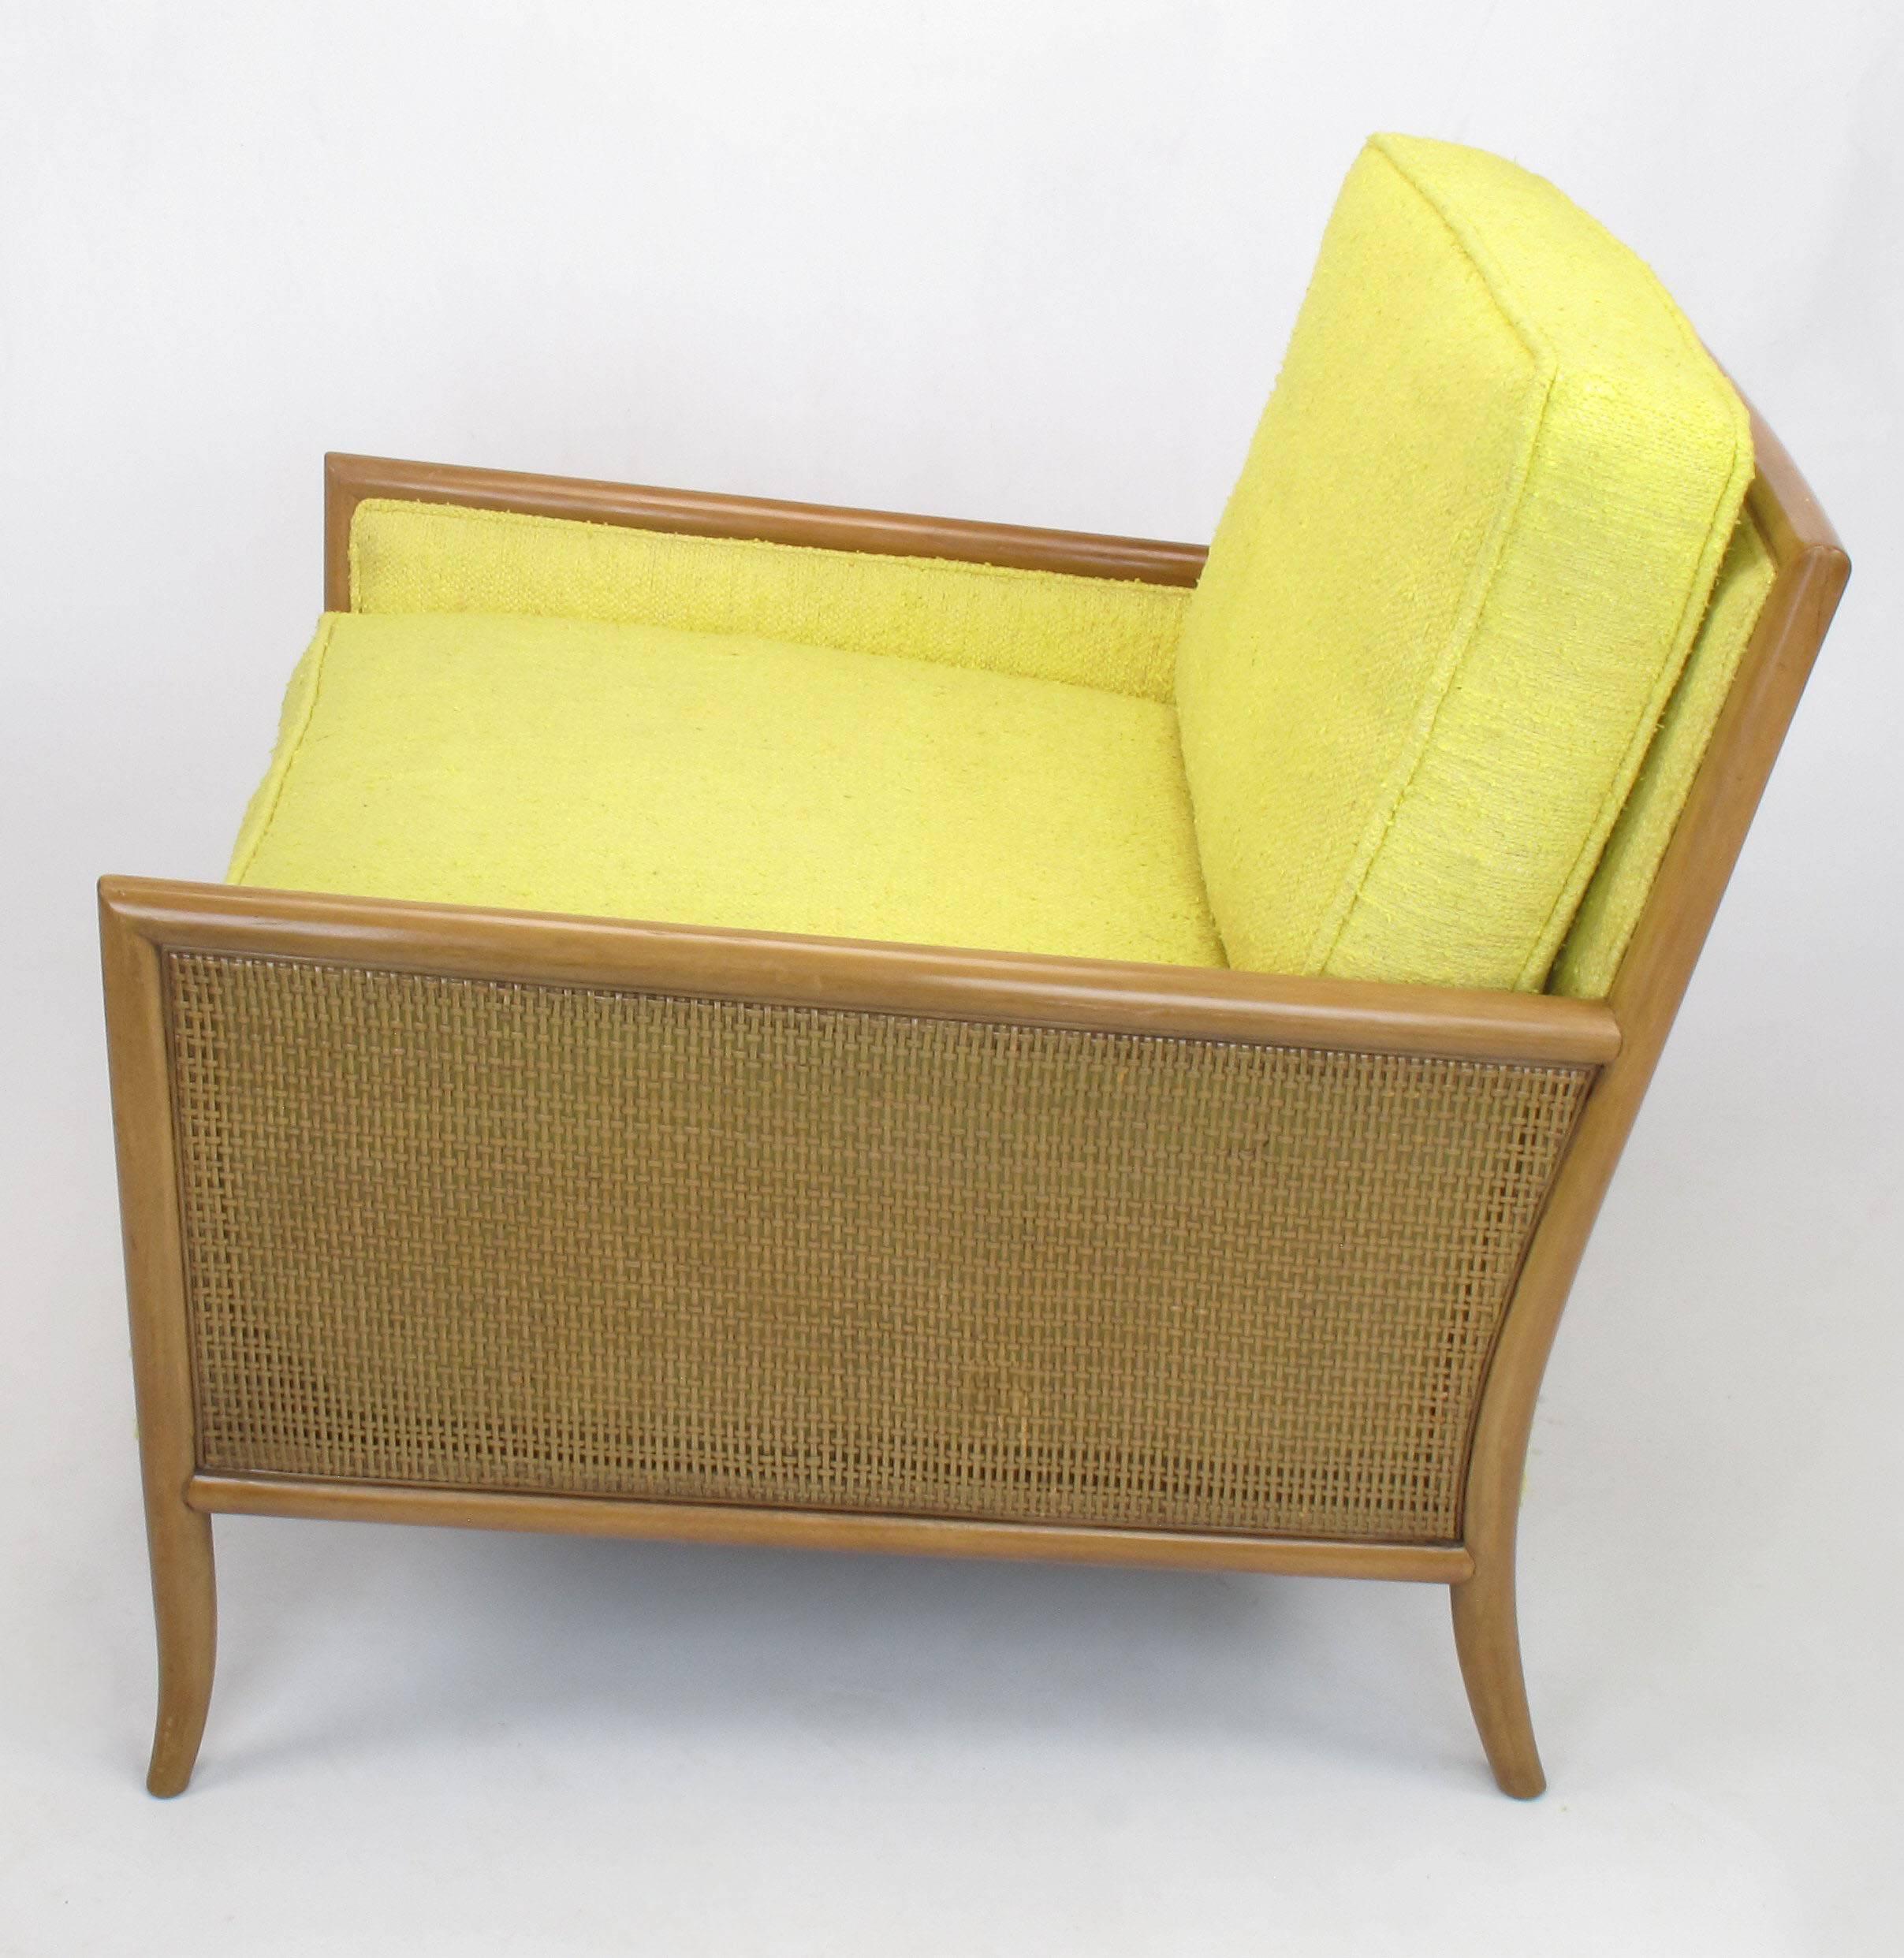 American Pair of Walnut & Yellow Haitian Cotton Lounge Chairs after TH. Robsjohn-Gibbings